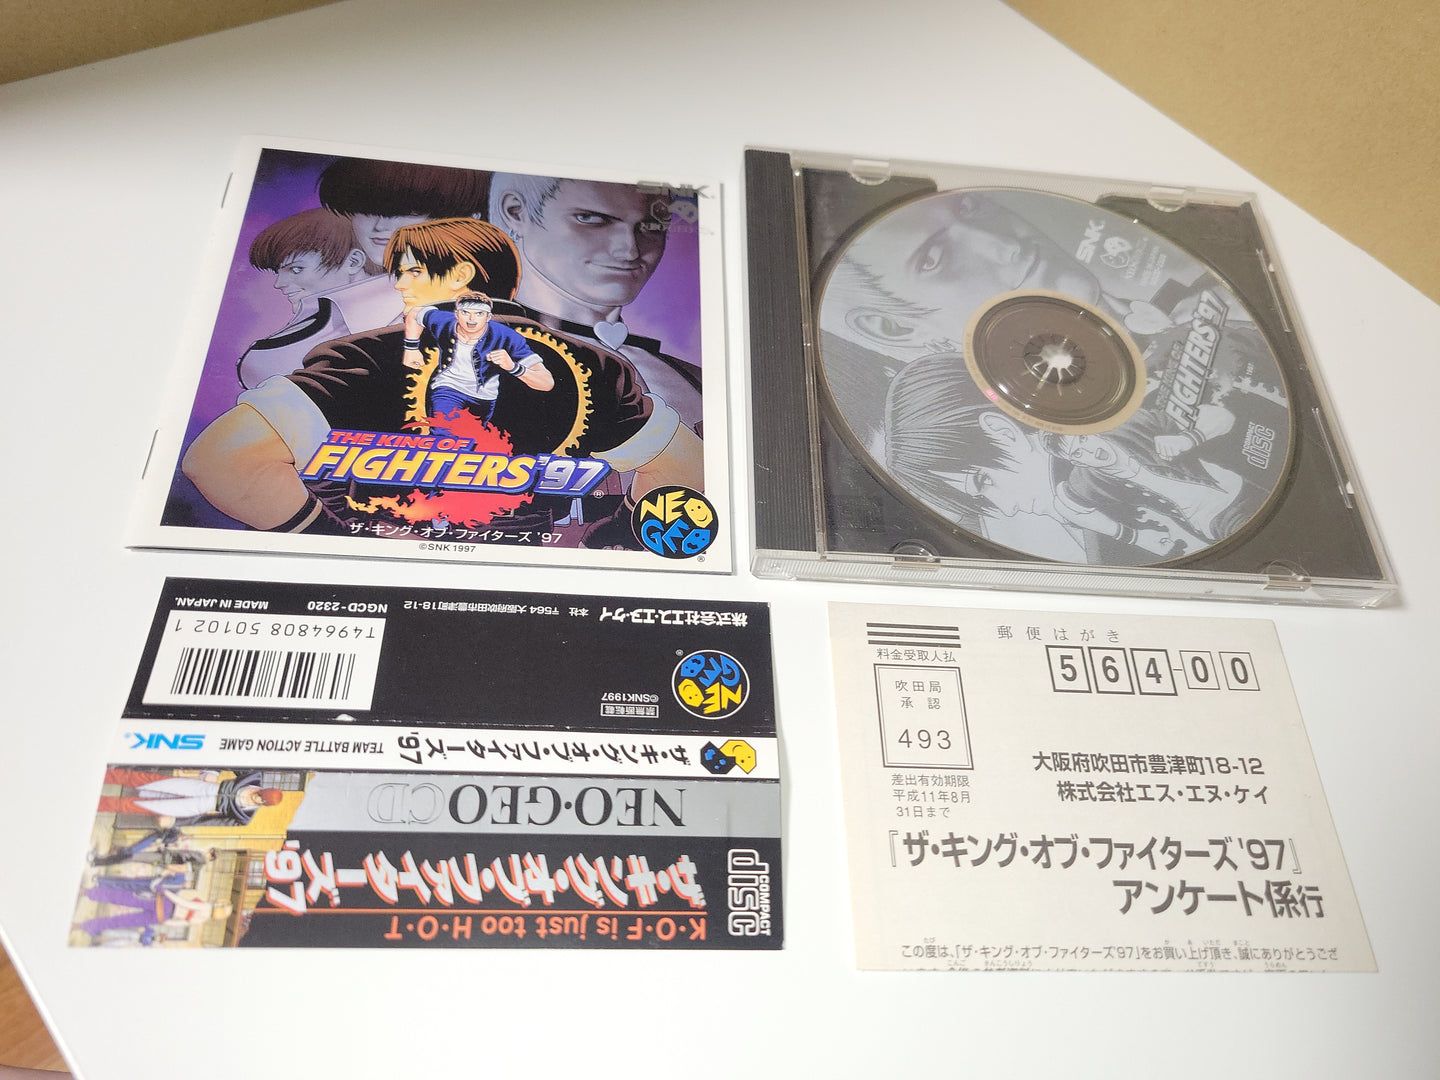 The King of fighters 97 - Snk Neogeo cd ngcd